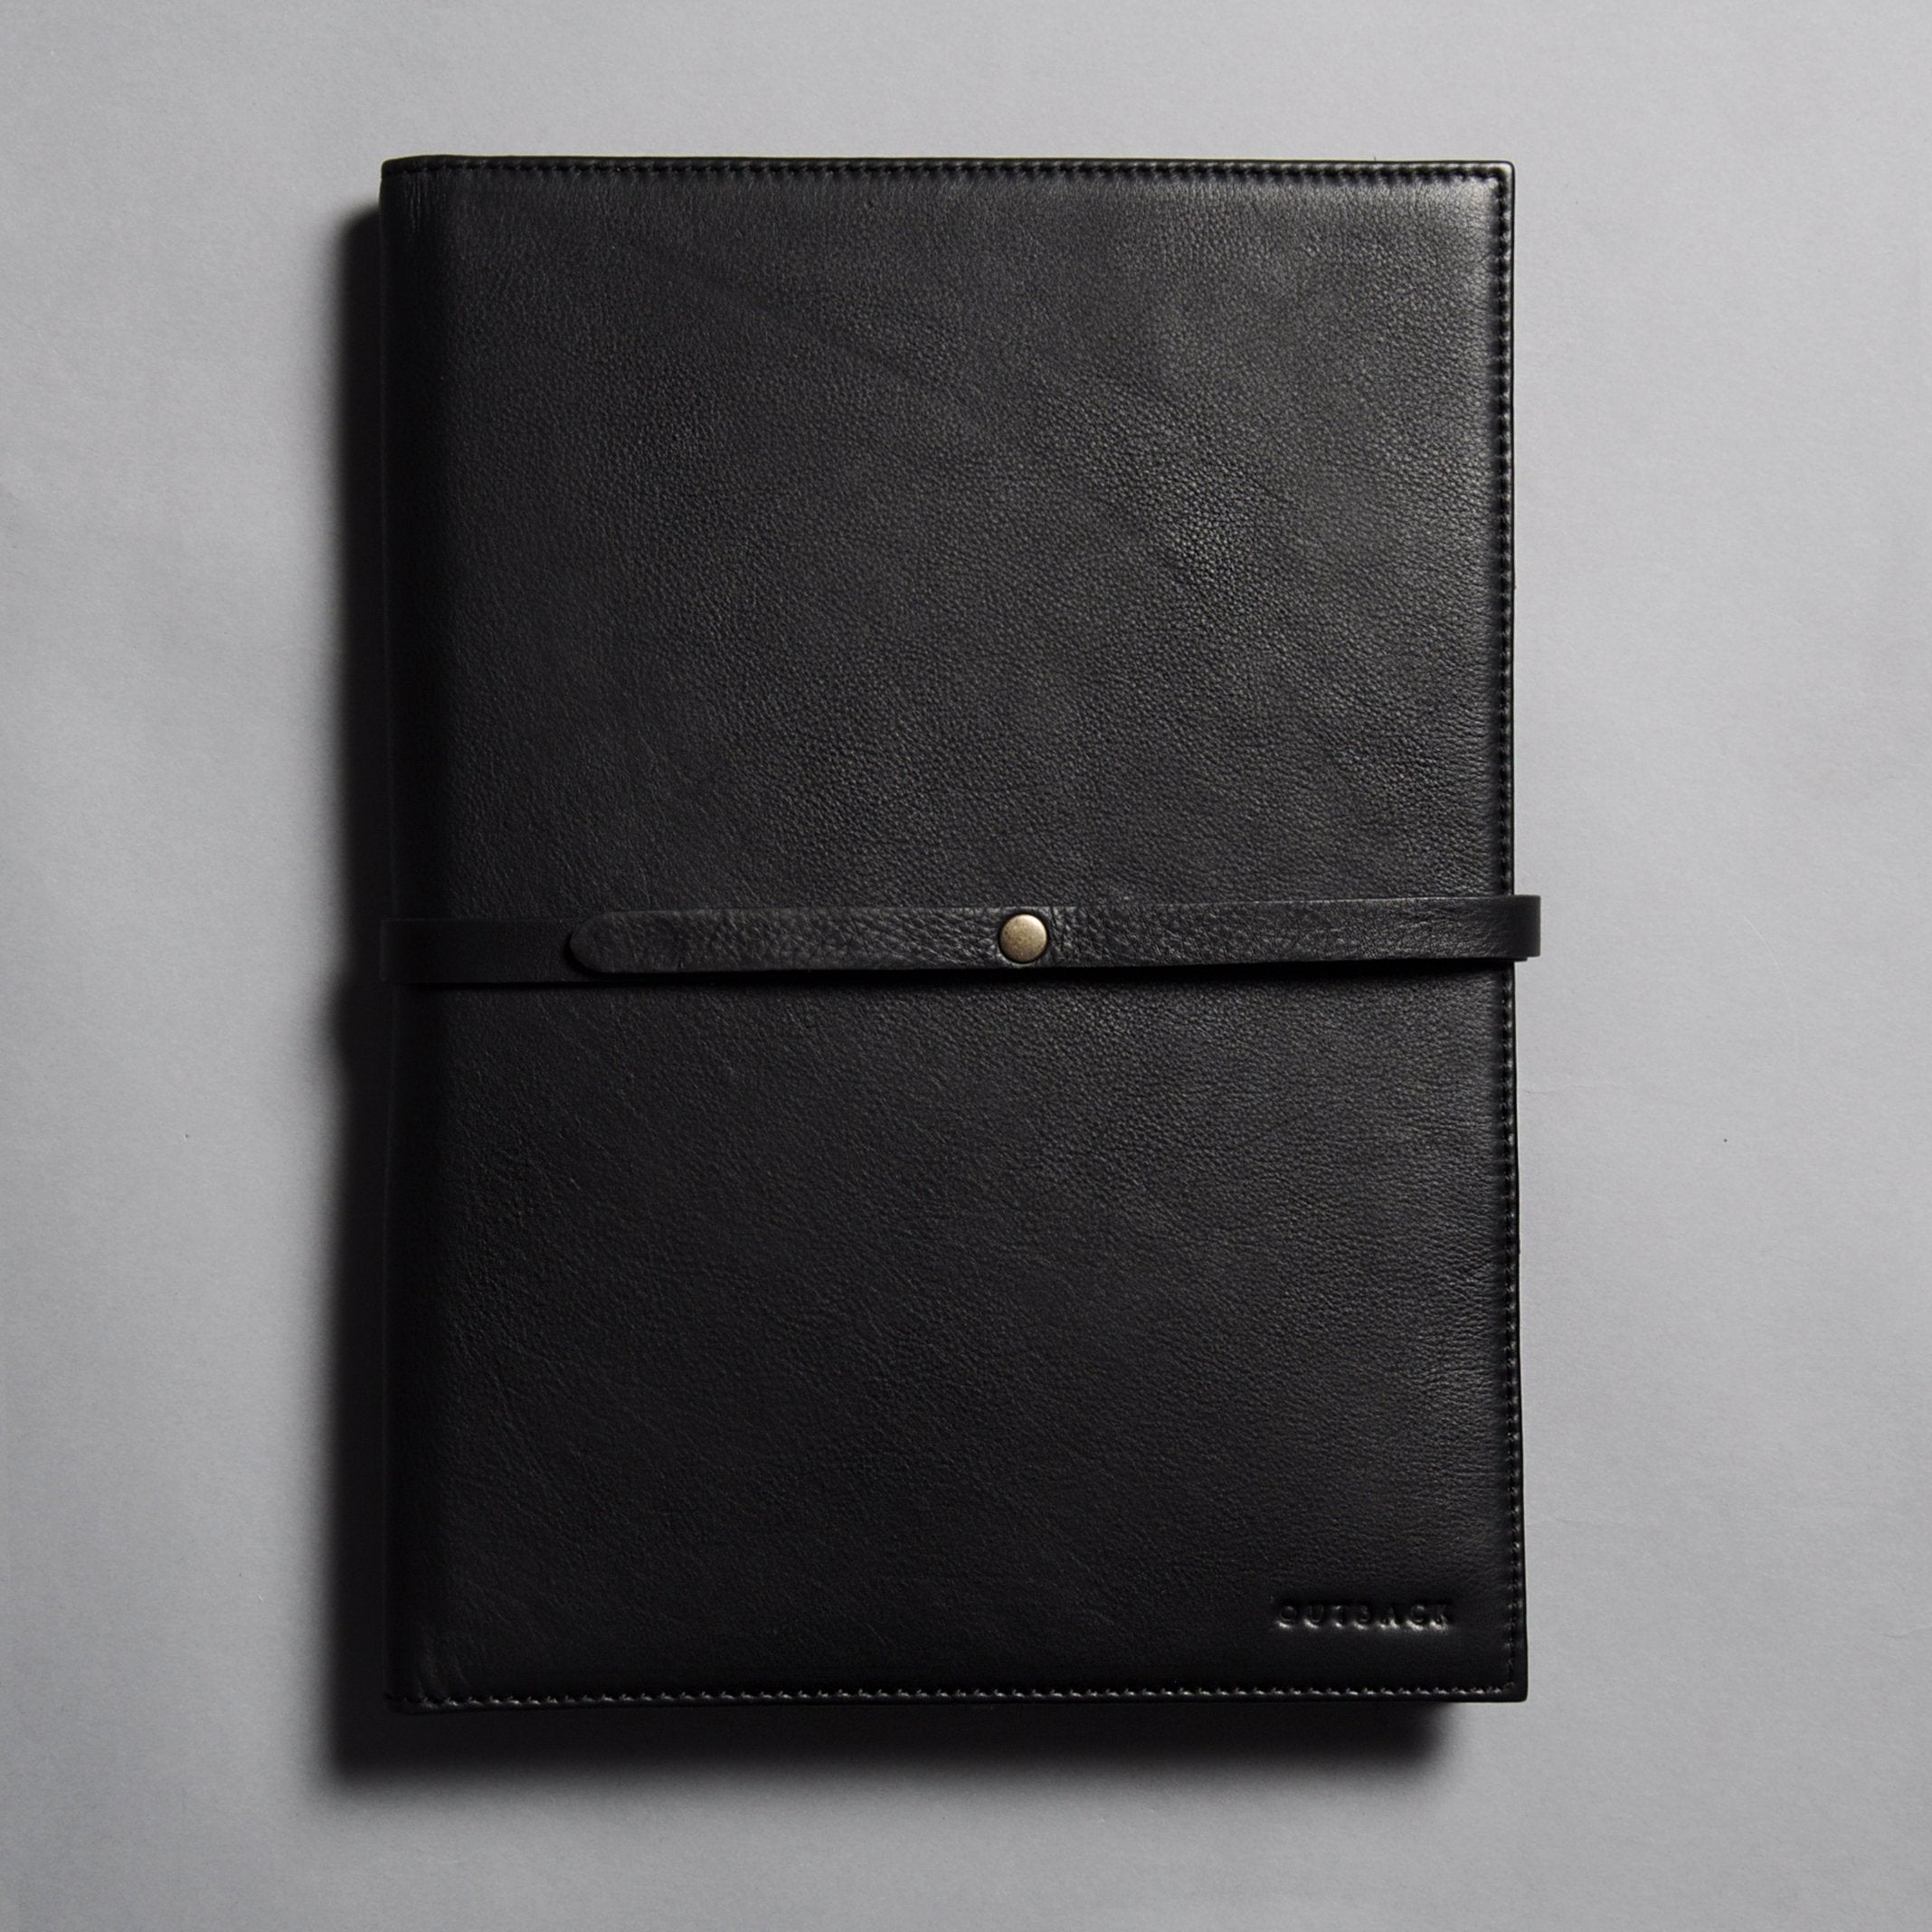 Daily leather organiser